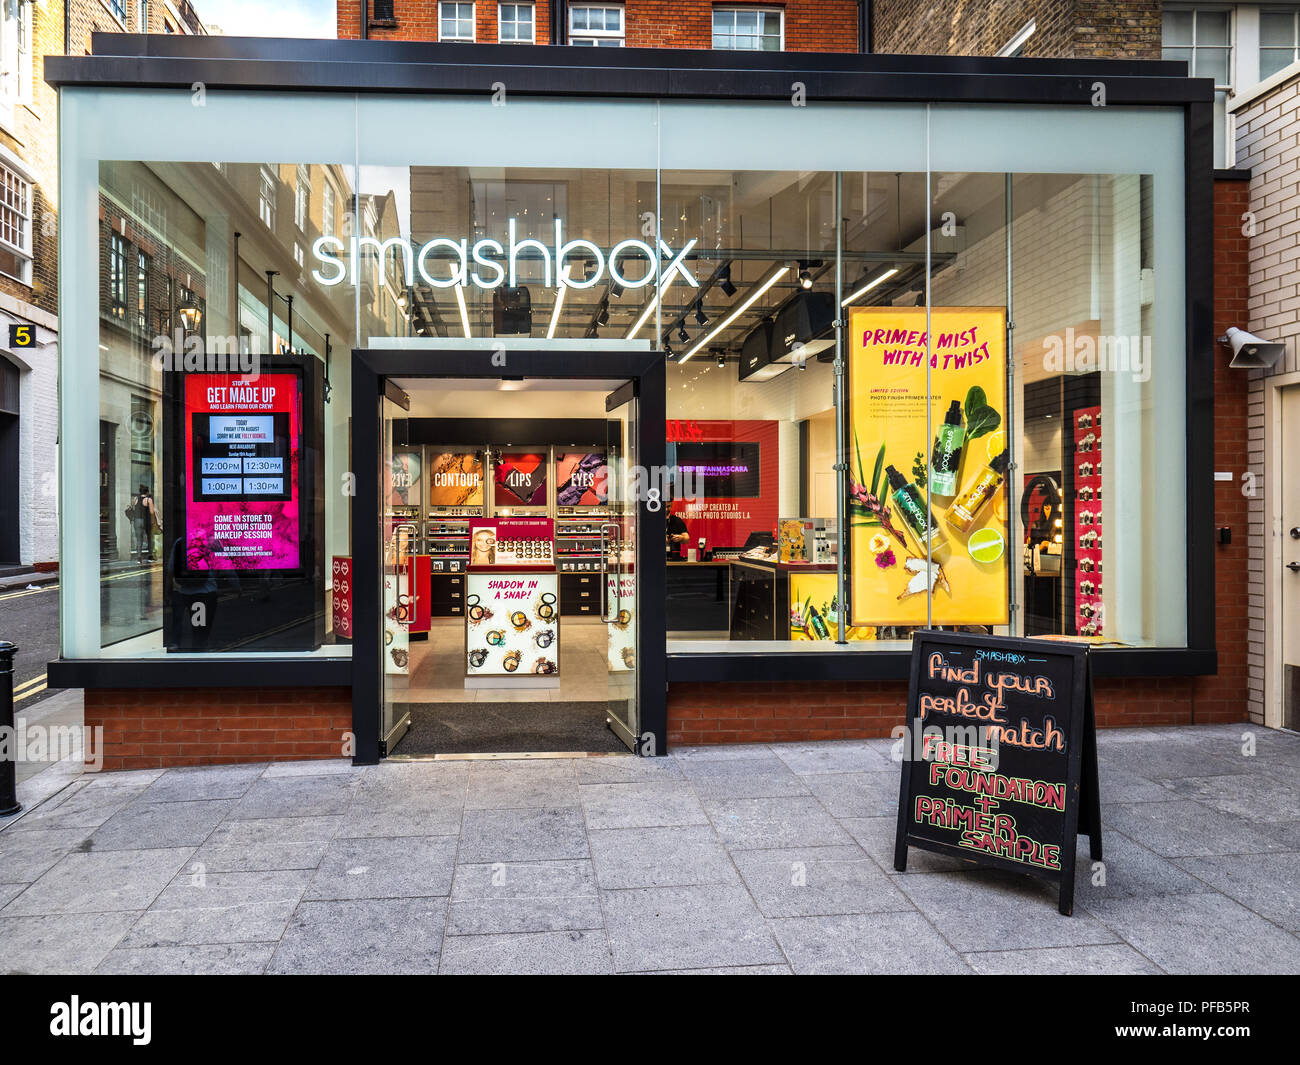 Smashbox Flagship Store in London's Covent Garden - Smashbox is a makeup & beauty products retailer started from Smashbox Studios in Los Angeles 1990 Stock Photo